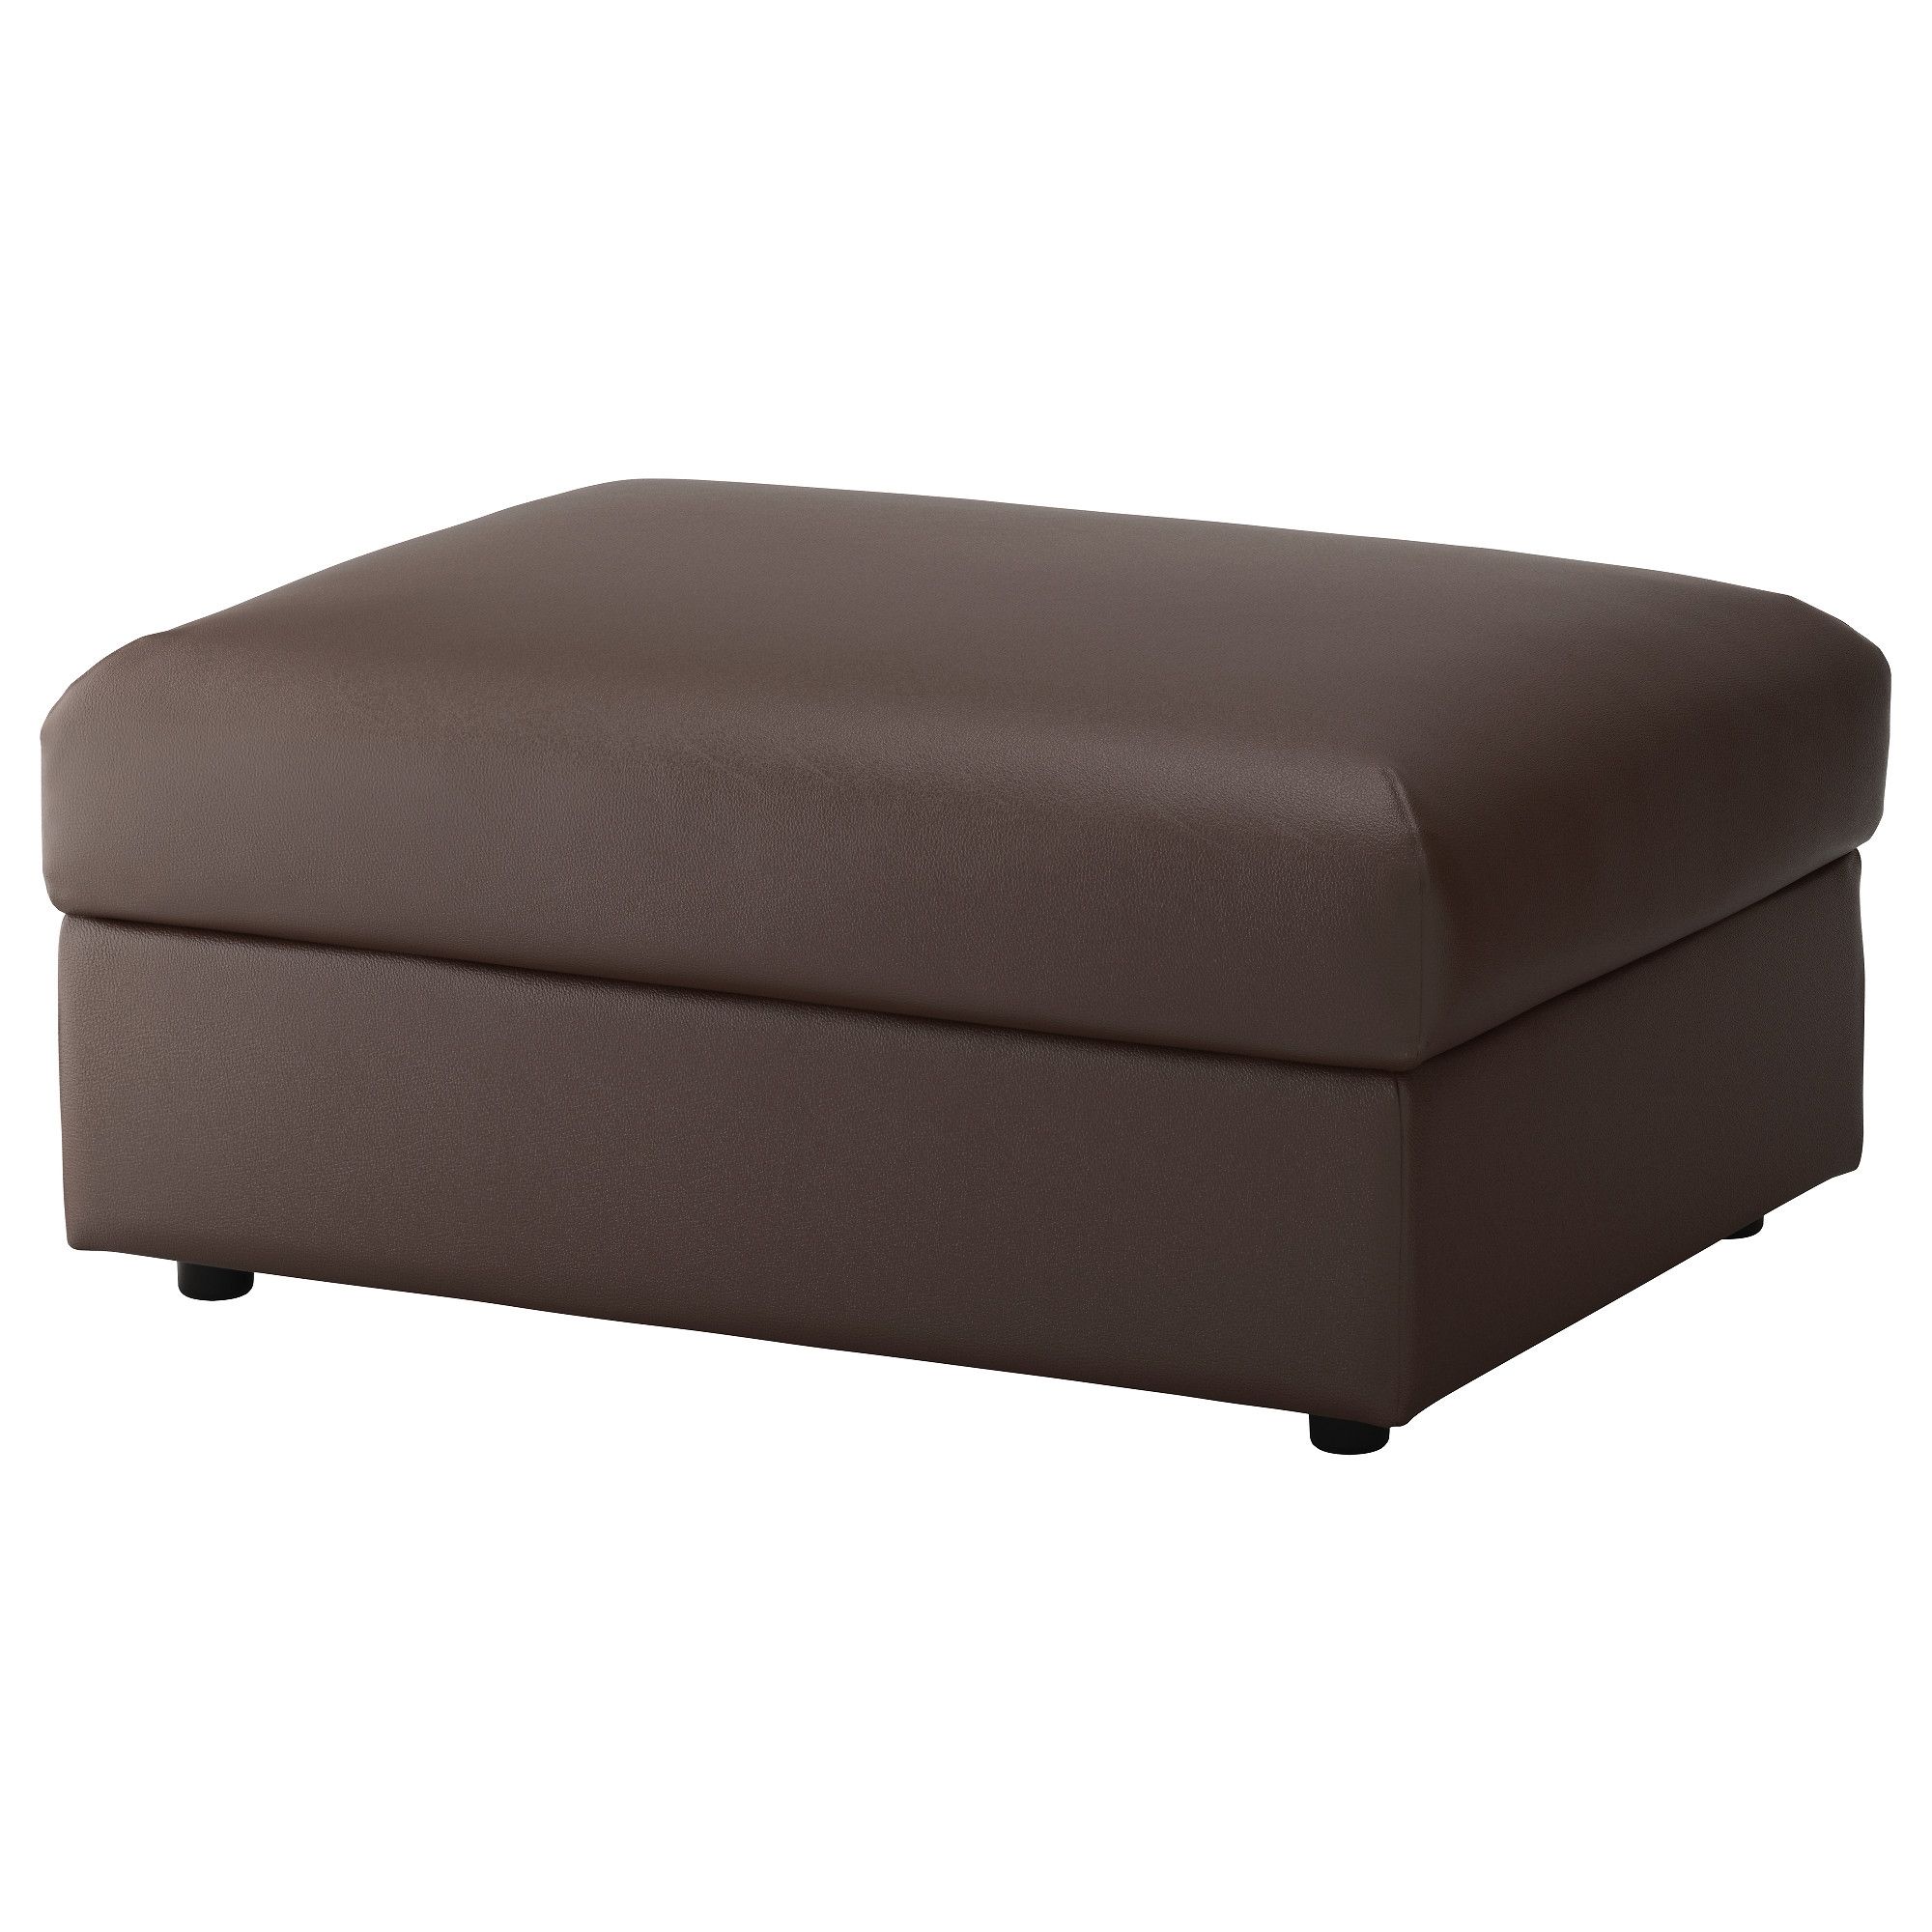 Vimle Footstool With Storage Farsta Dark Brown Ikea Throughout Fabric Footstools And Pouffes (View 3 of 15)